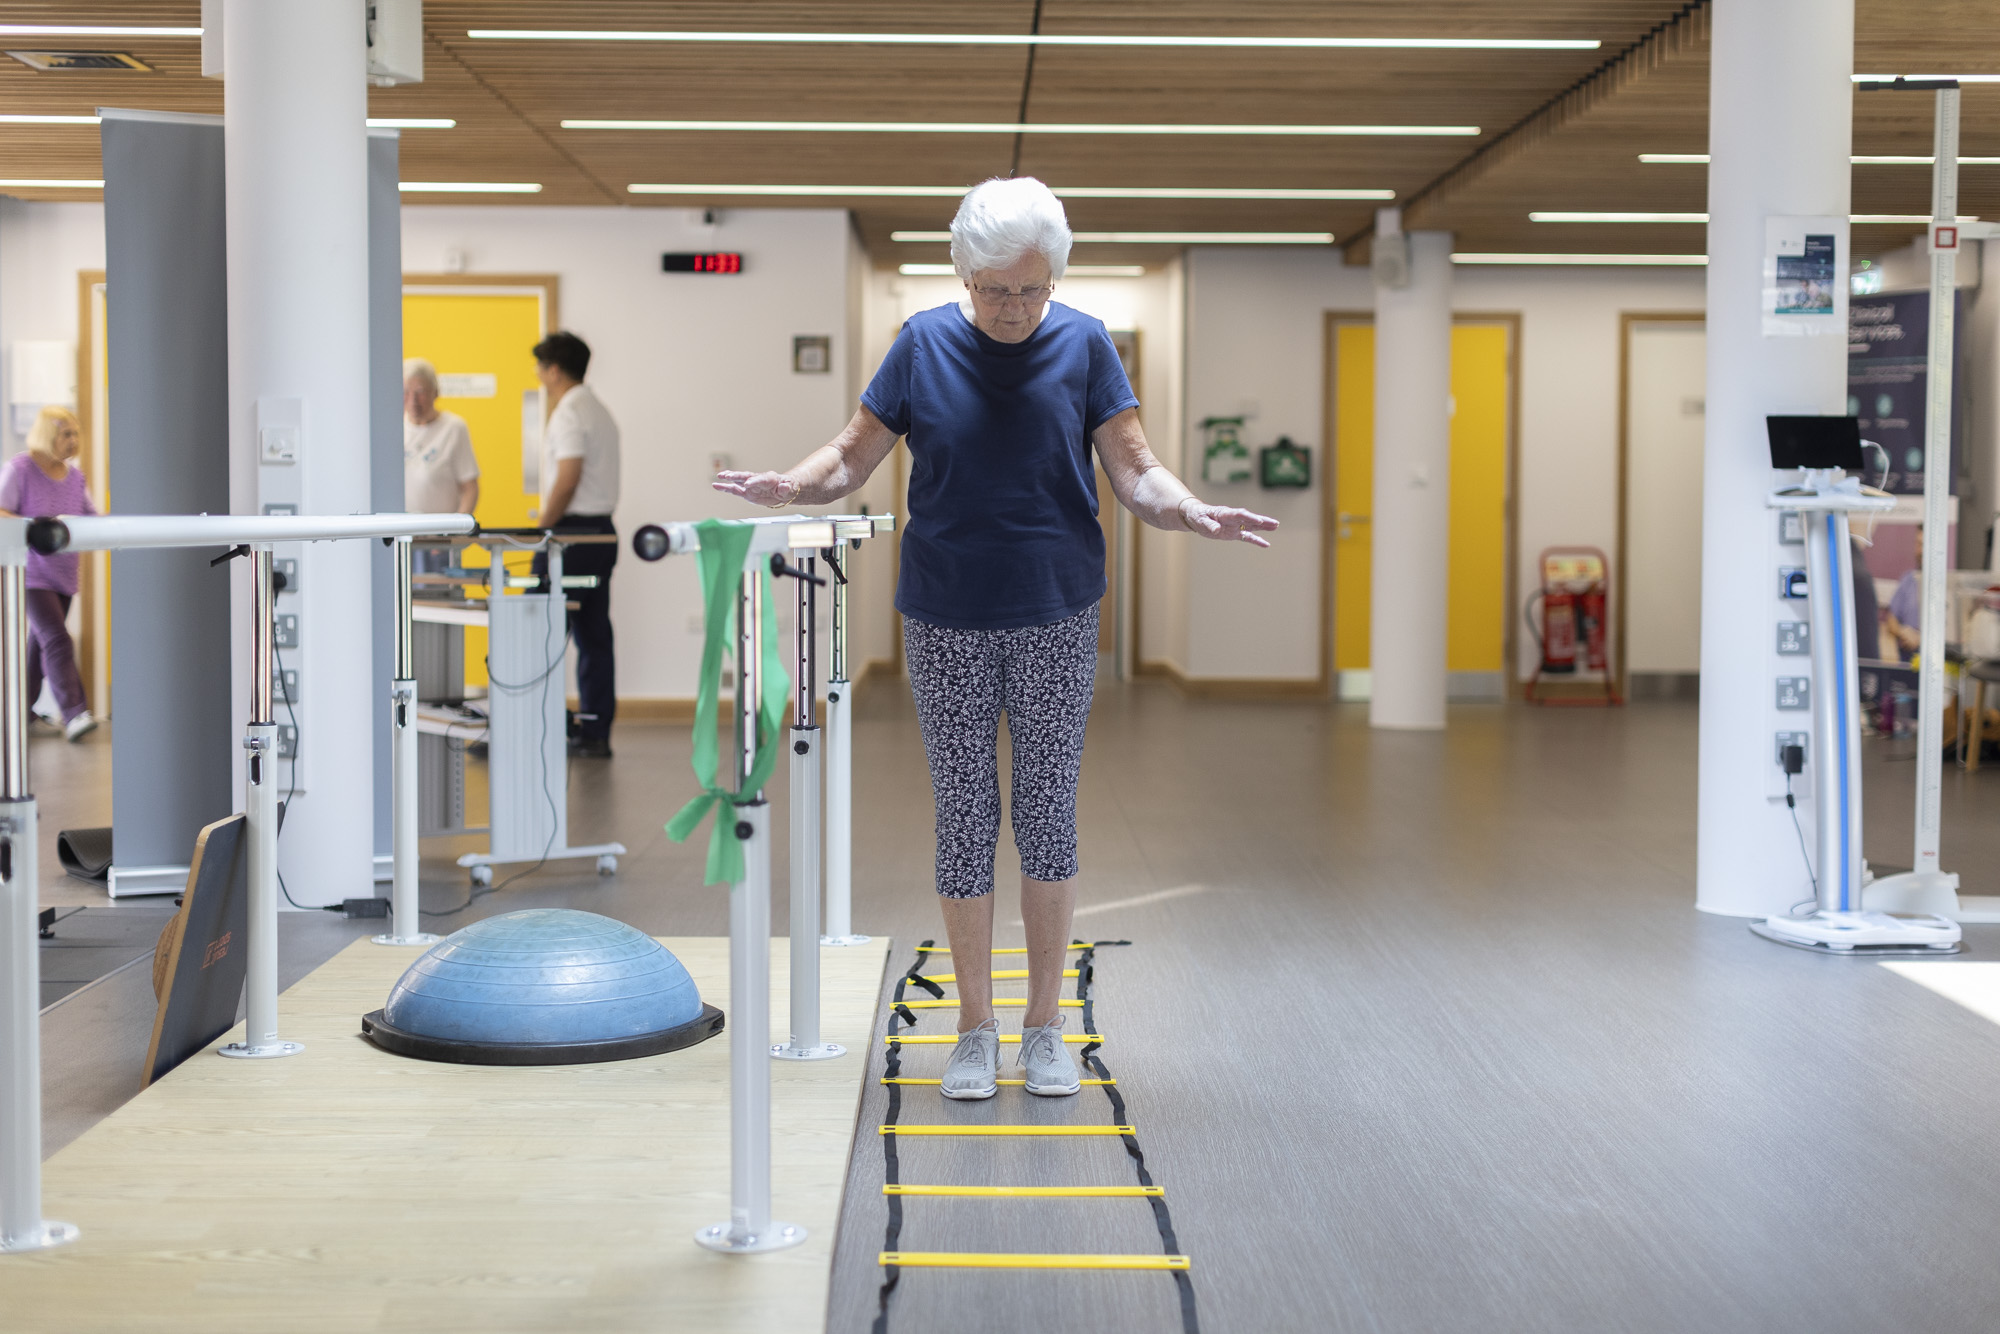 patient walking unassisted and completing balance exercise